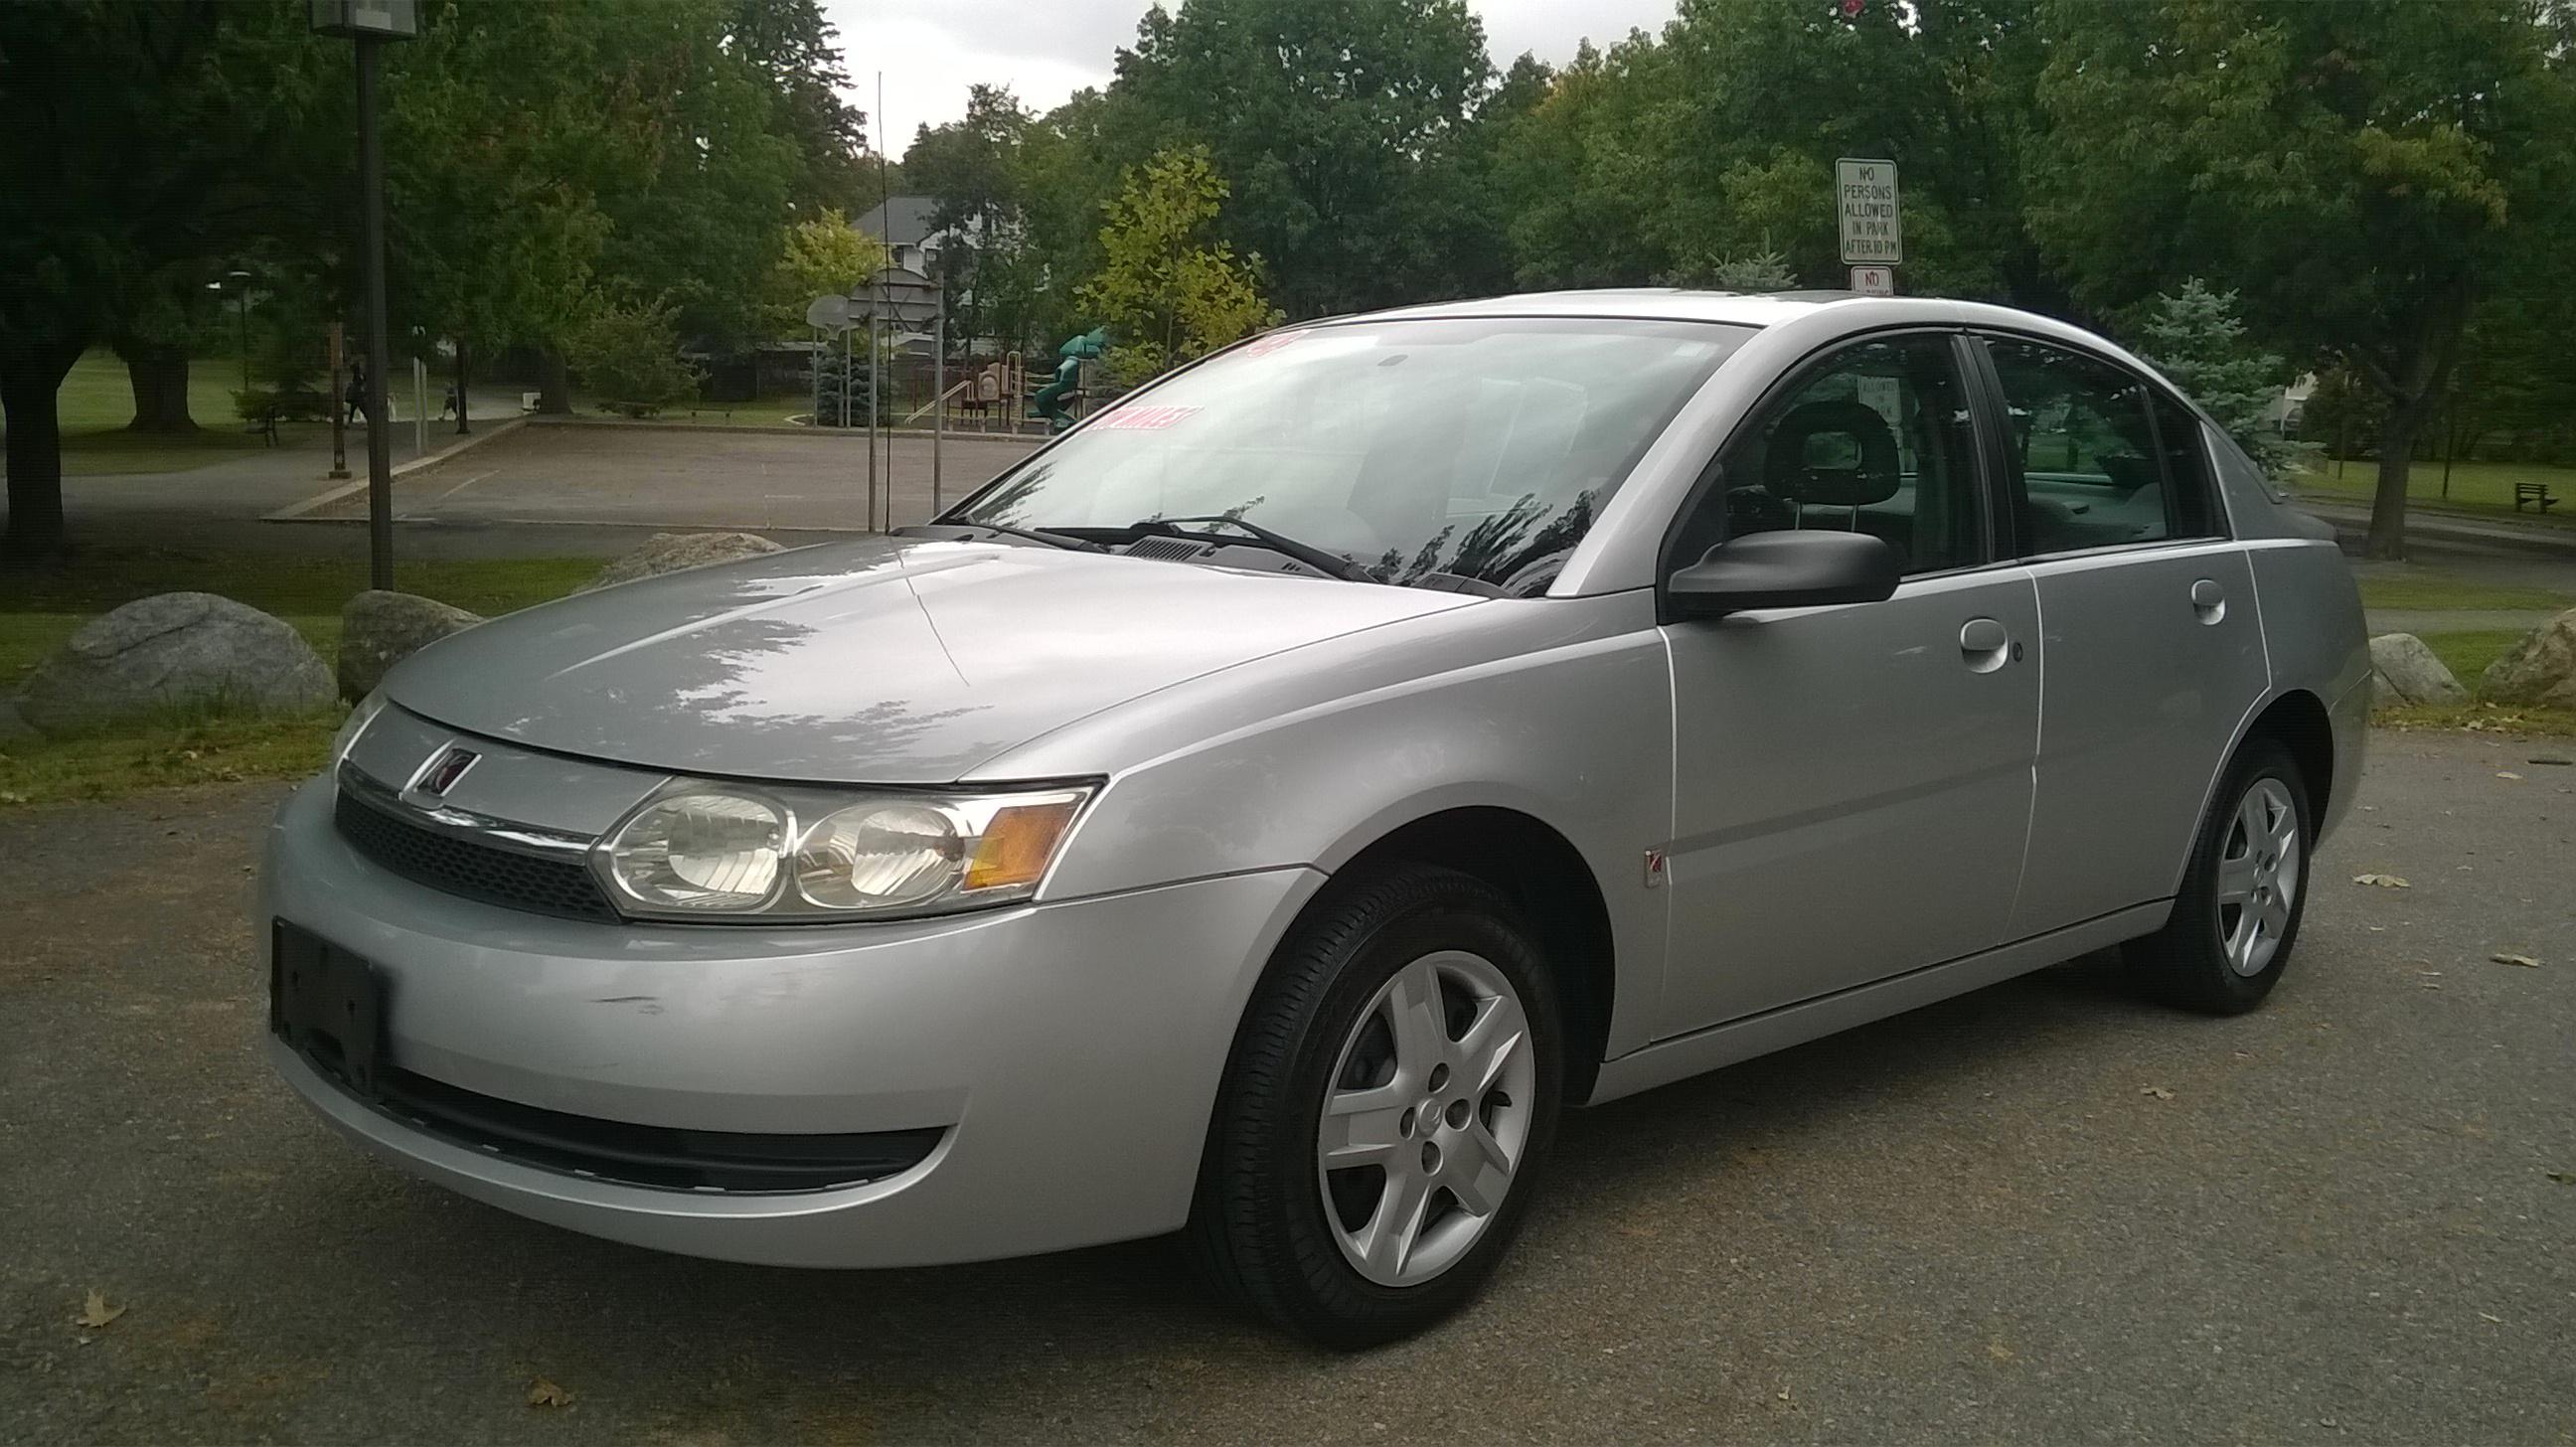 2004 Saturn Ion 2 - By the time you're done reading this, you will have  already forgotten what this post was about. : r/regularcarreviews